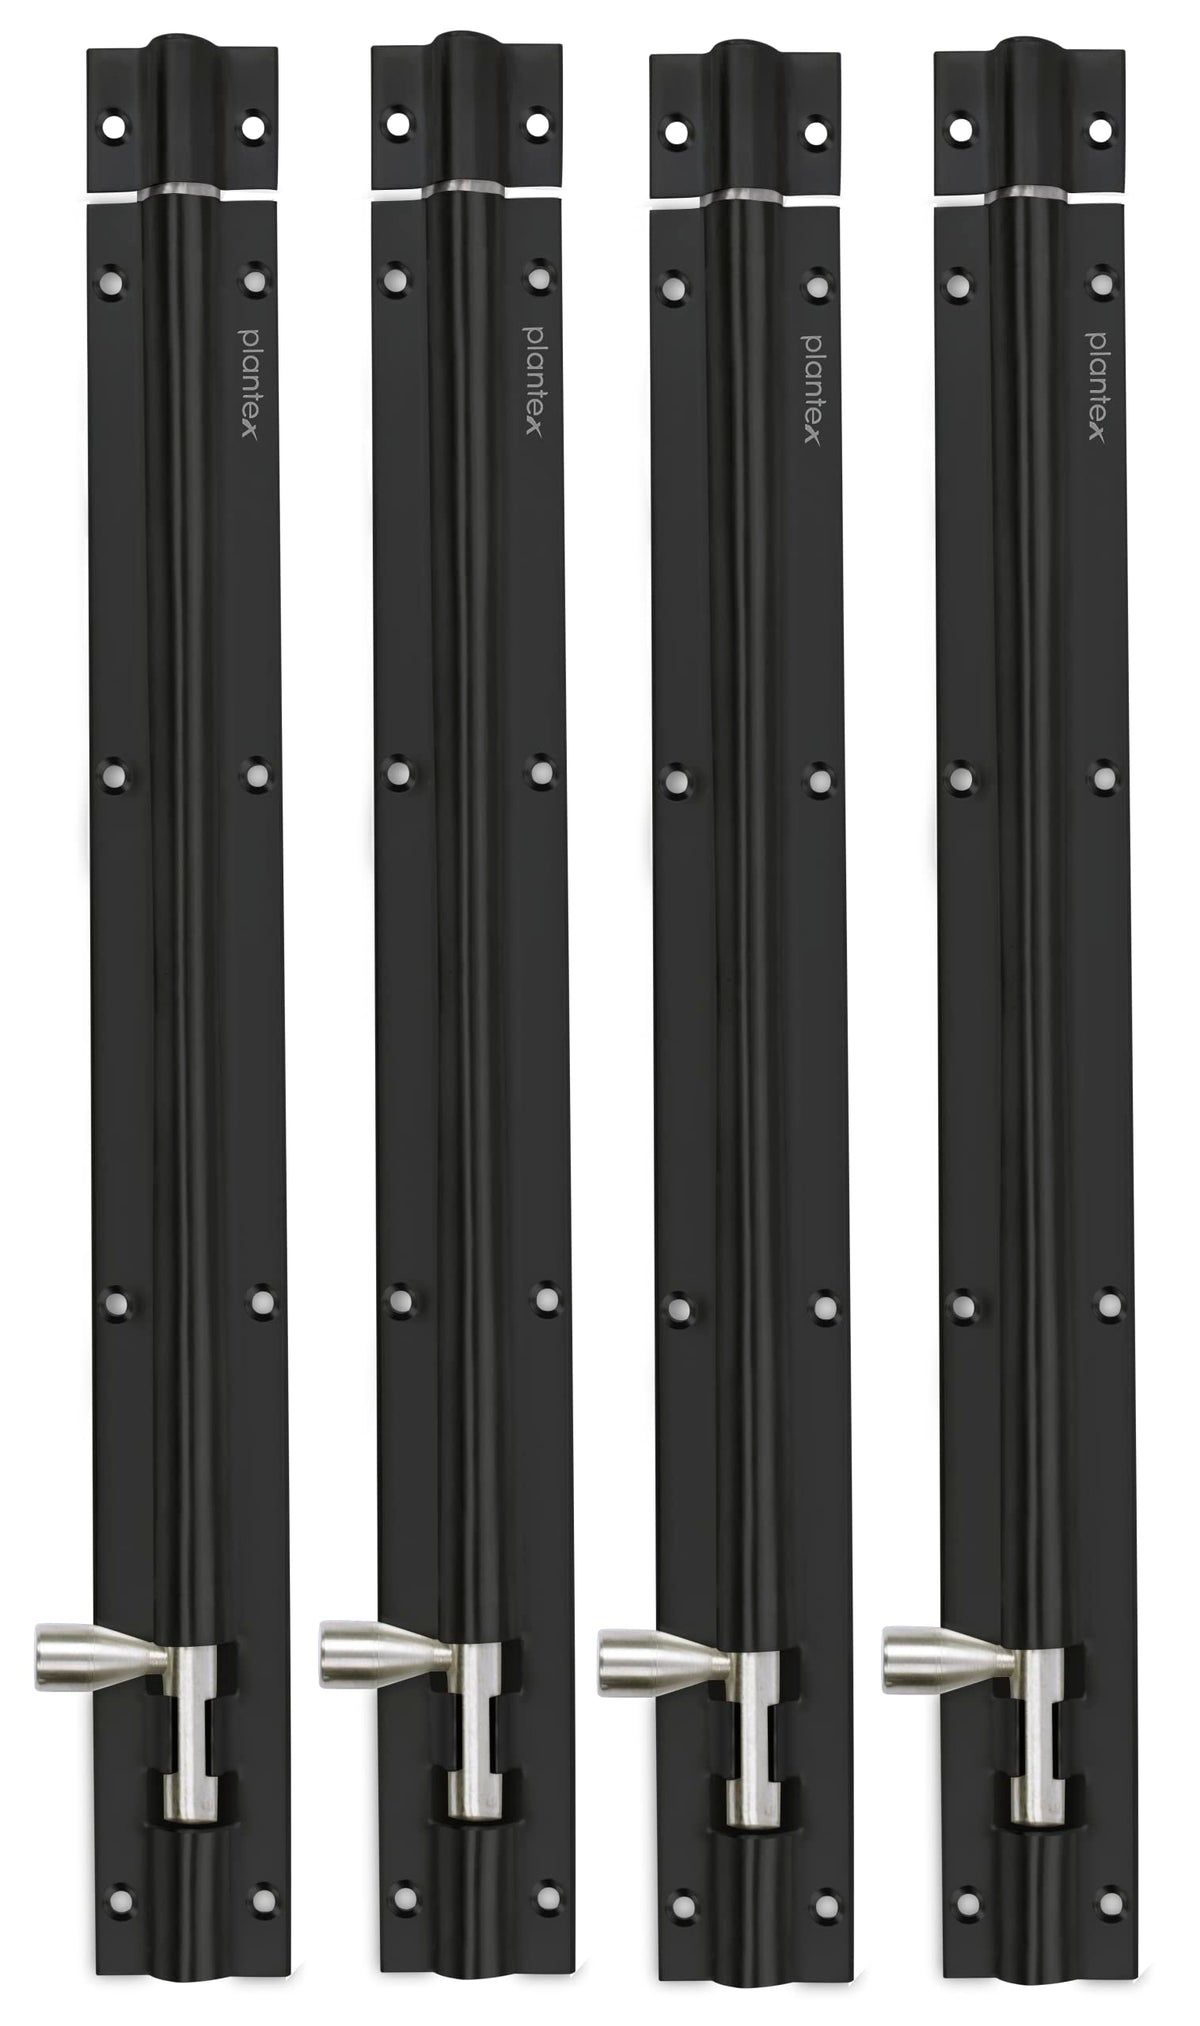 Plantex Black Tower Bolt for Windows/Doors/Wardrobe - 12-inches (Pack of 4)